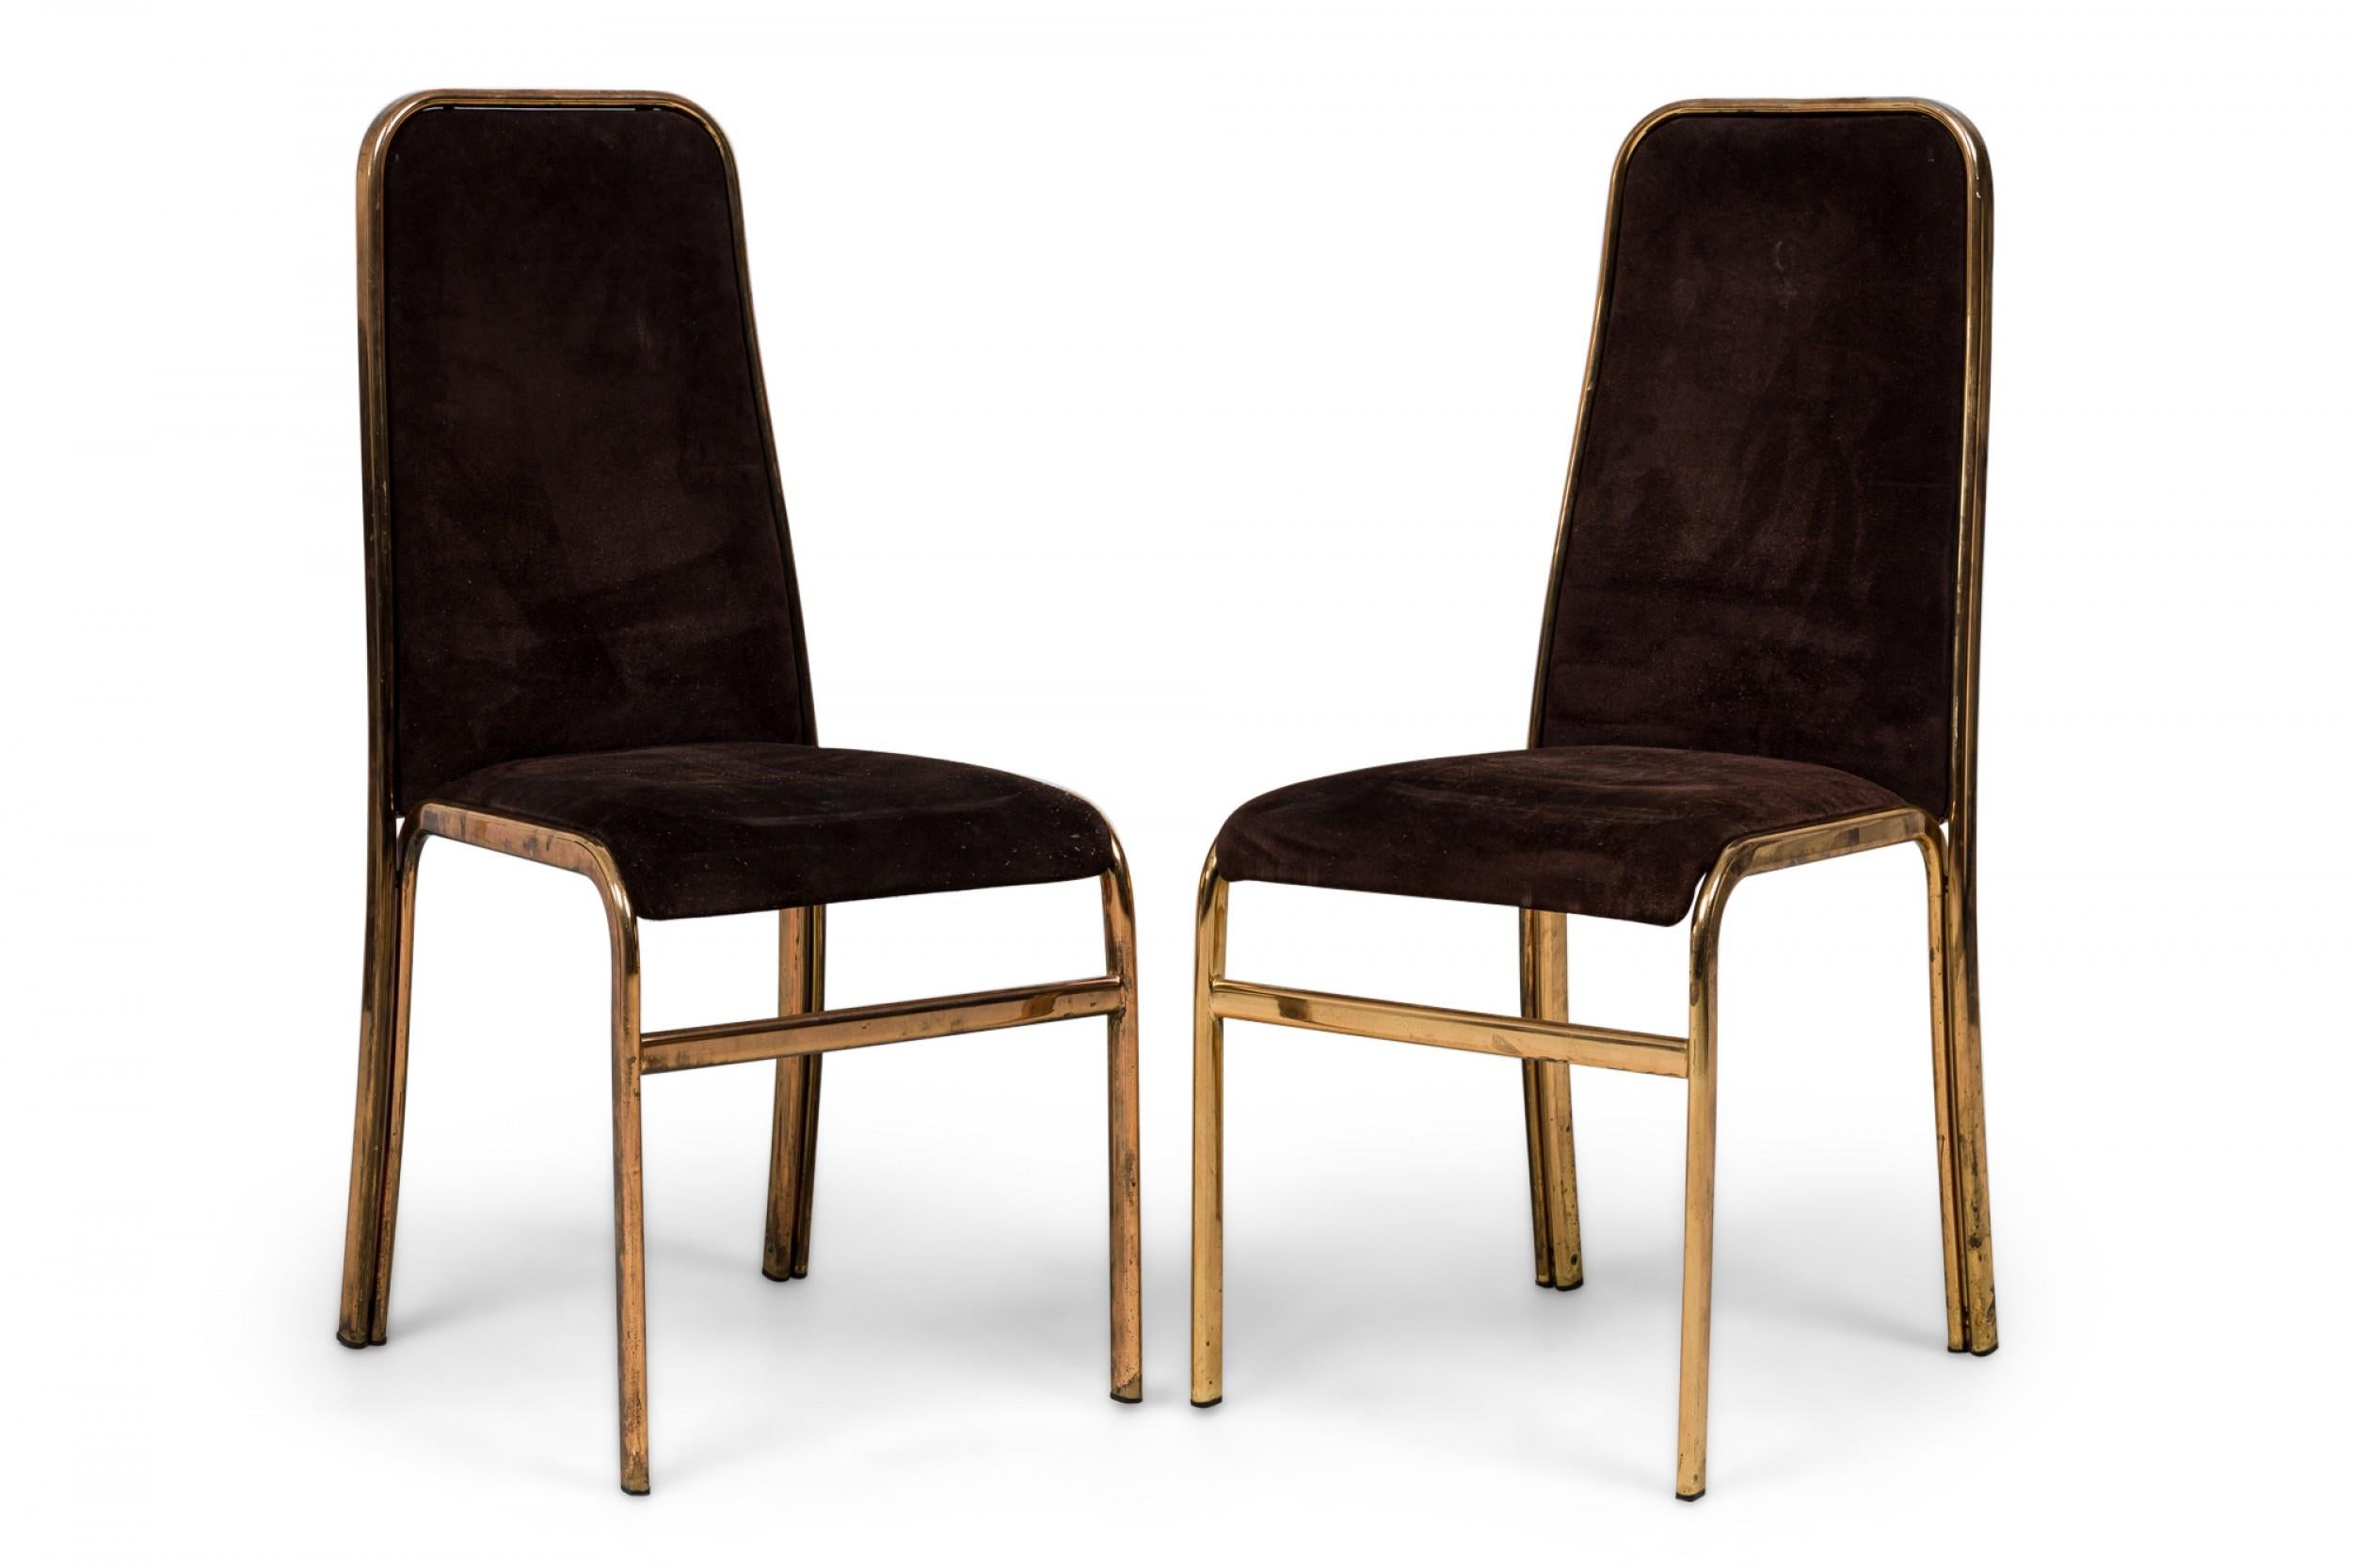 Set of 6 Mid-Century American brass sculptural dining chairs in flattened tubular form featuring sloped and tapered rectangular backs with rounded shoulders and convex seats, upholstered in dark chocolate brown suede. (PRICED AS SET)